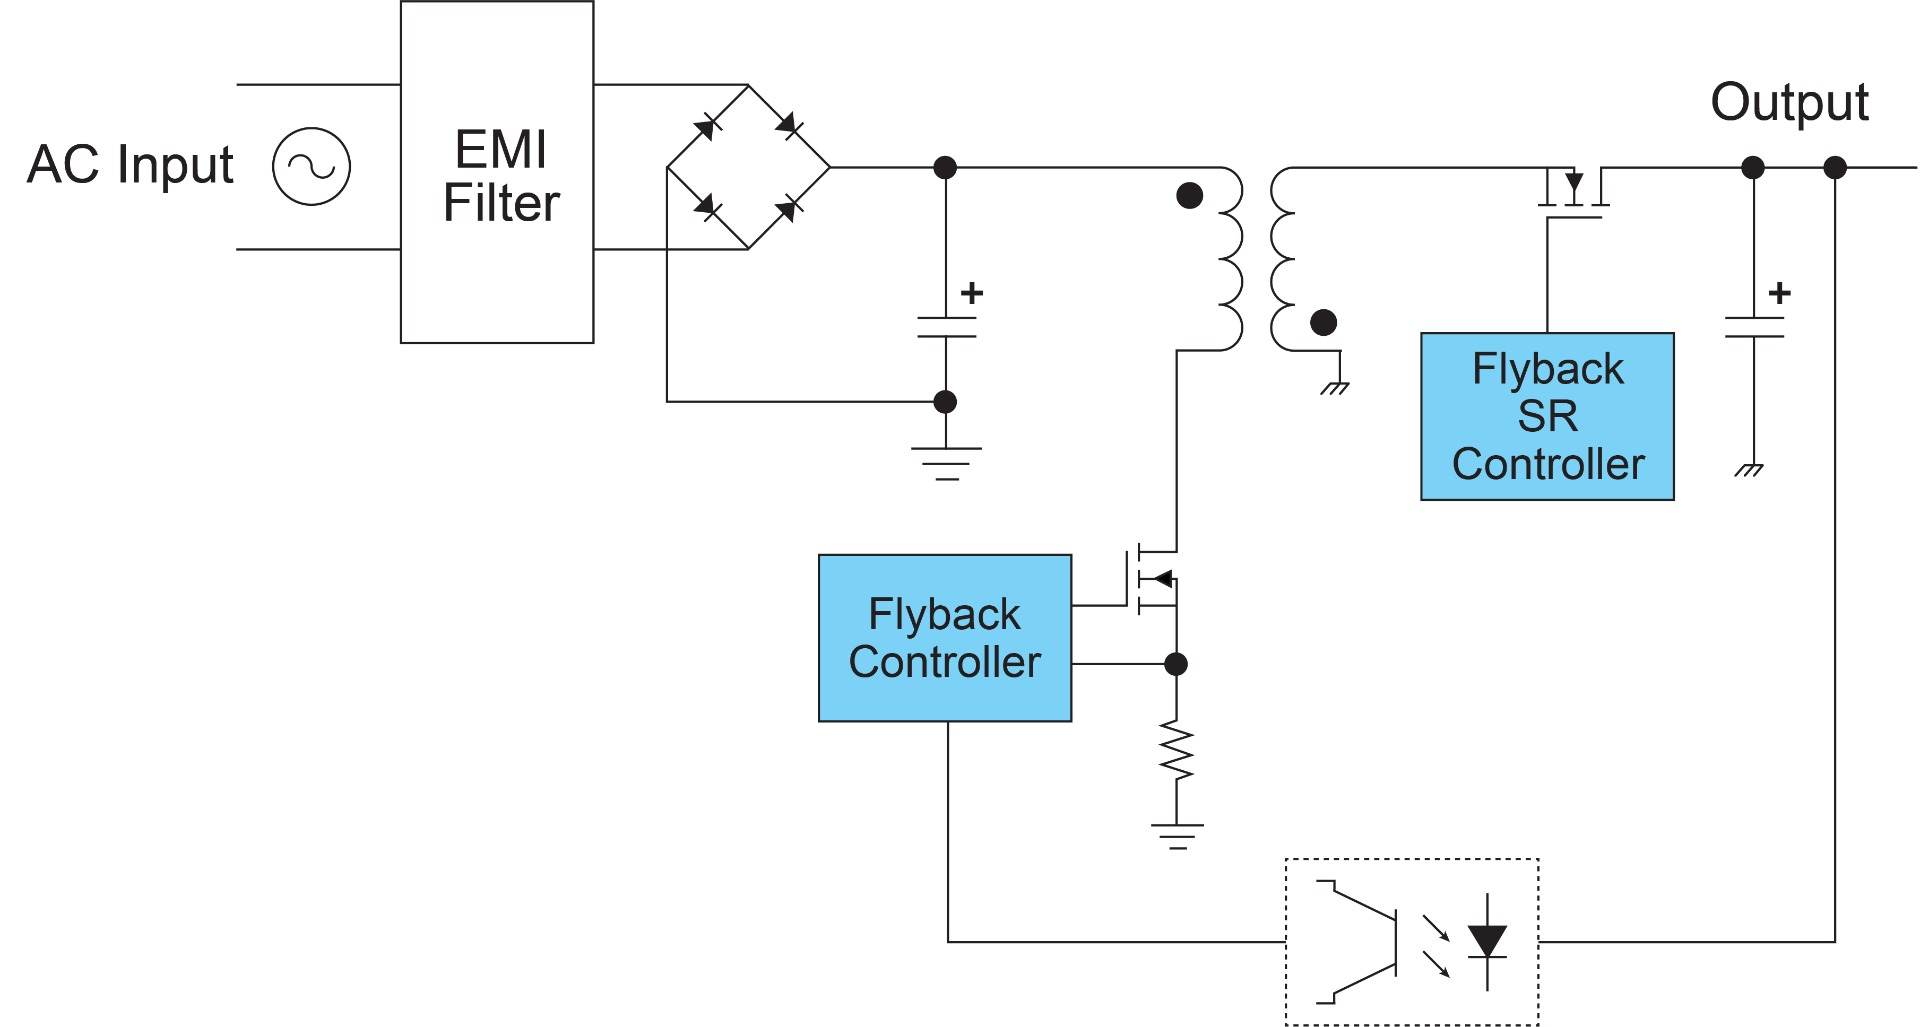 Figure 1: Typical Block Diagram for a Flyback Power Supply Used in Fast Chargers